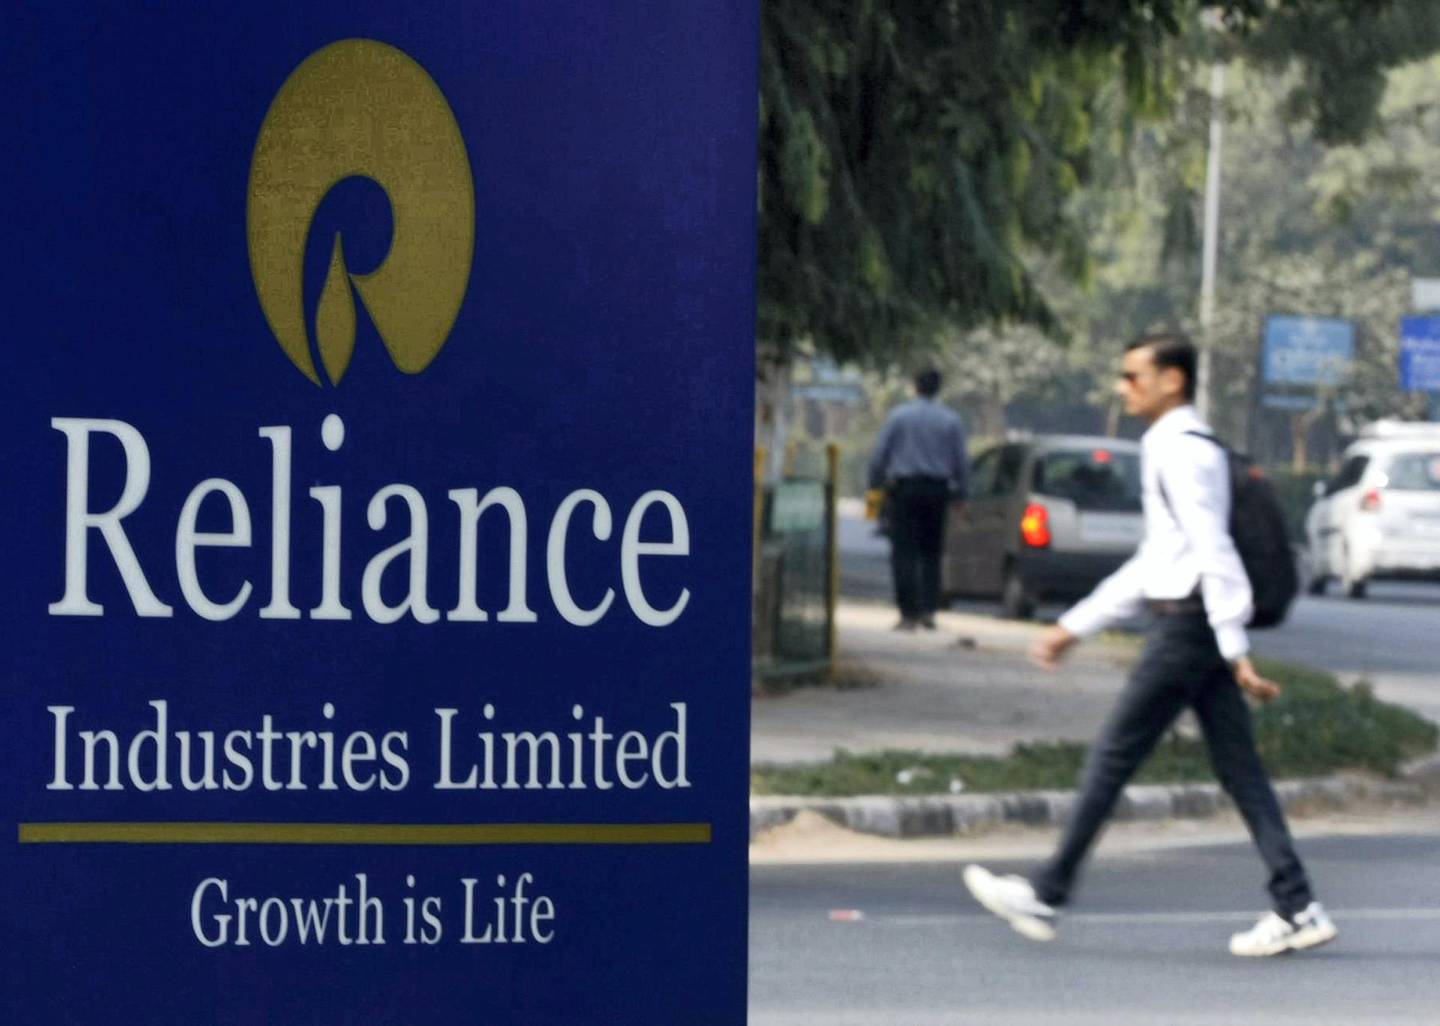 A man walks past a Reliance Industries Limited sign board installed on a road divider in the western Indian city of Gandhinagar January 17, 2014. Indian energy conglomerate Reliance Industries reported a nearly flat profit of 55.11 billion rupees ($895 million) for the December quarter but beat analyst estimates, helped by stable margins in its main refining business. REUTERS/Amit Dave (INDIA - Tags: BUSINESS ENERGY) - GM1EA1H1L8B01